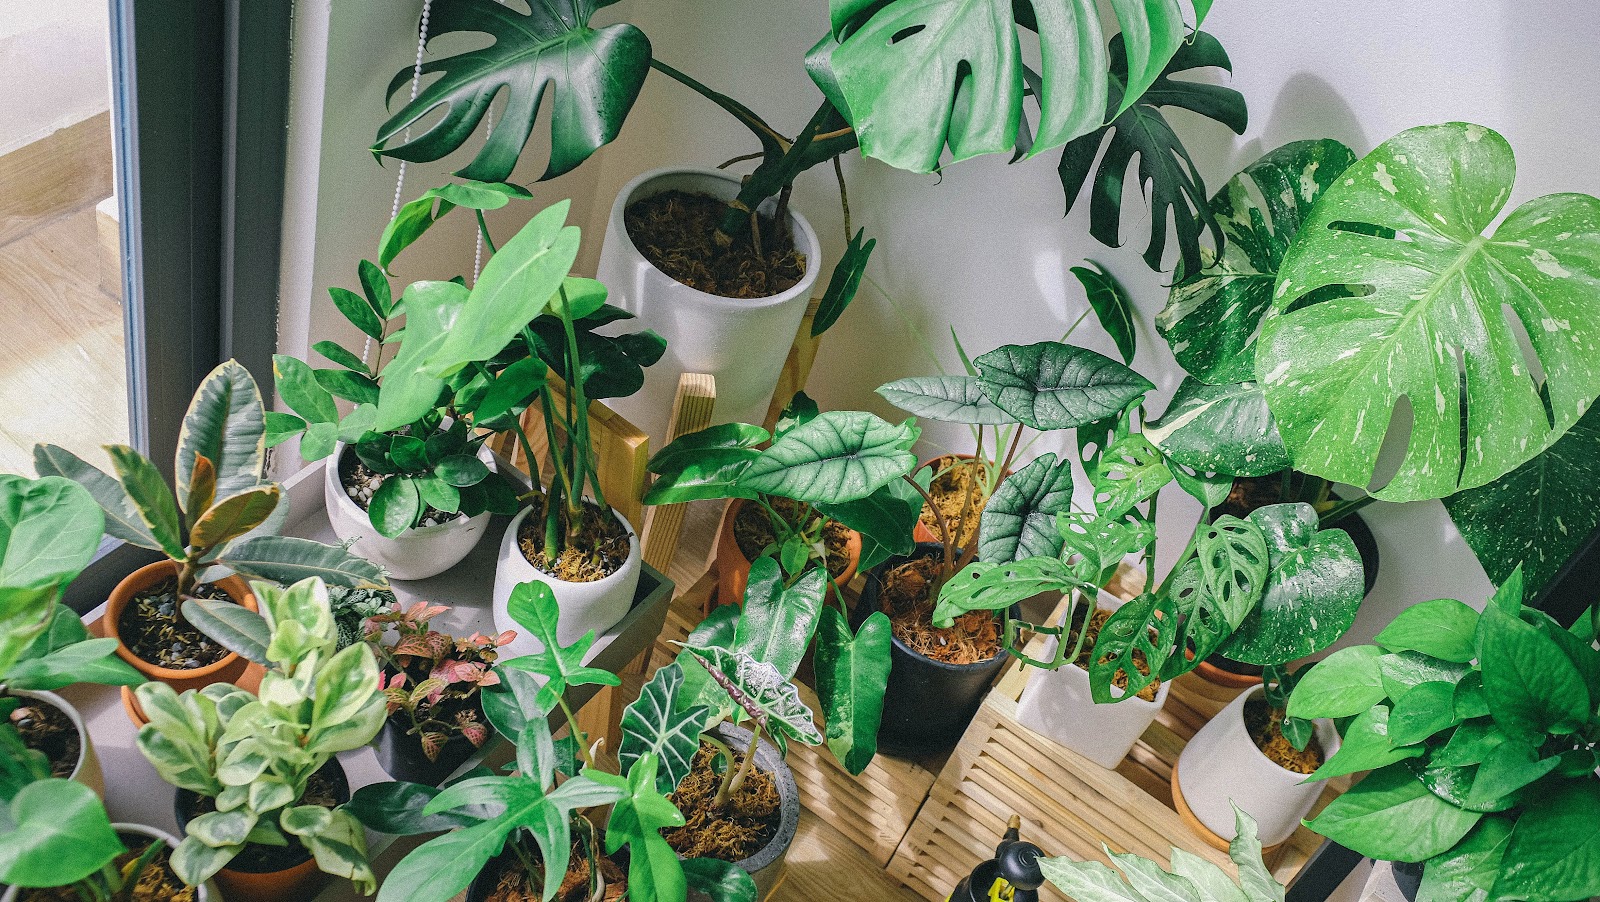 When it comes to livening up a home, indoor plants tend to bring a bit more to your space than most people realize, and here are 4 indoor plants for beginners